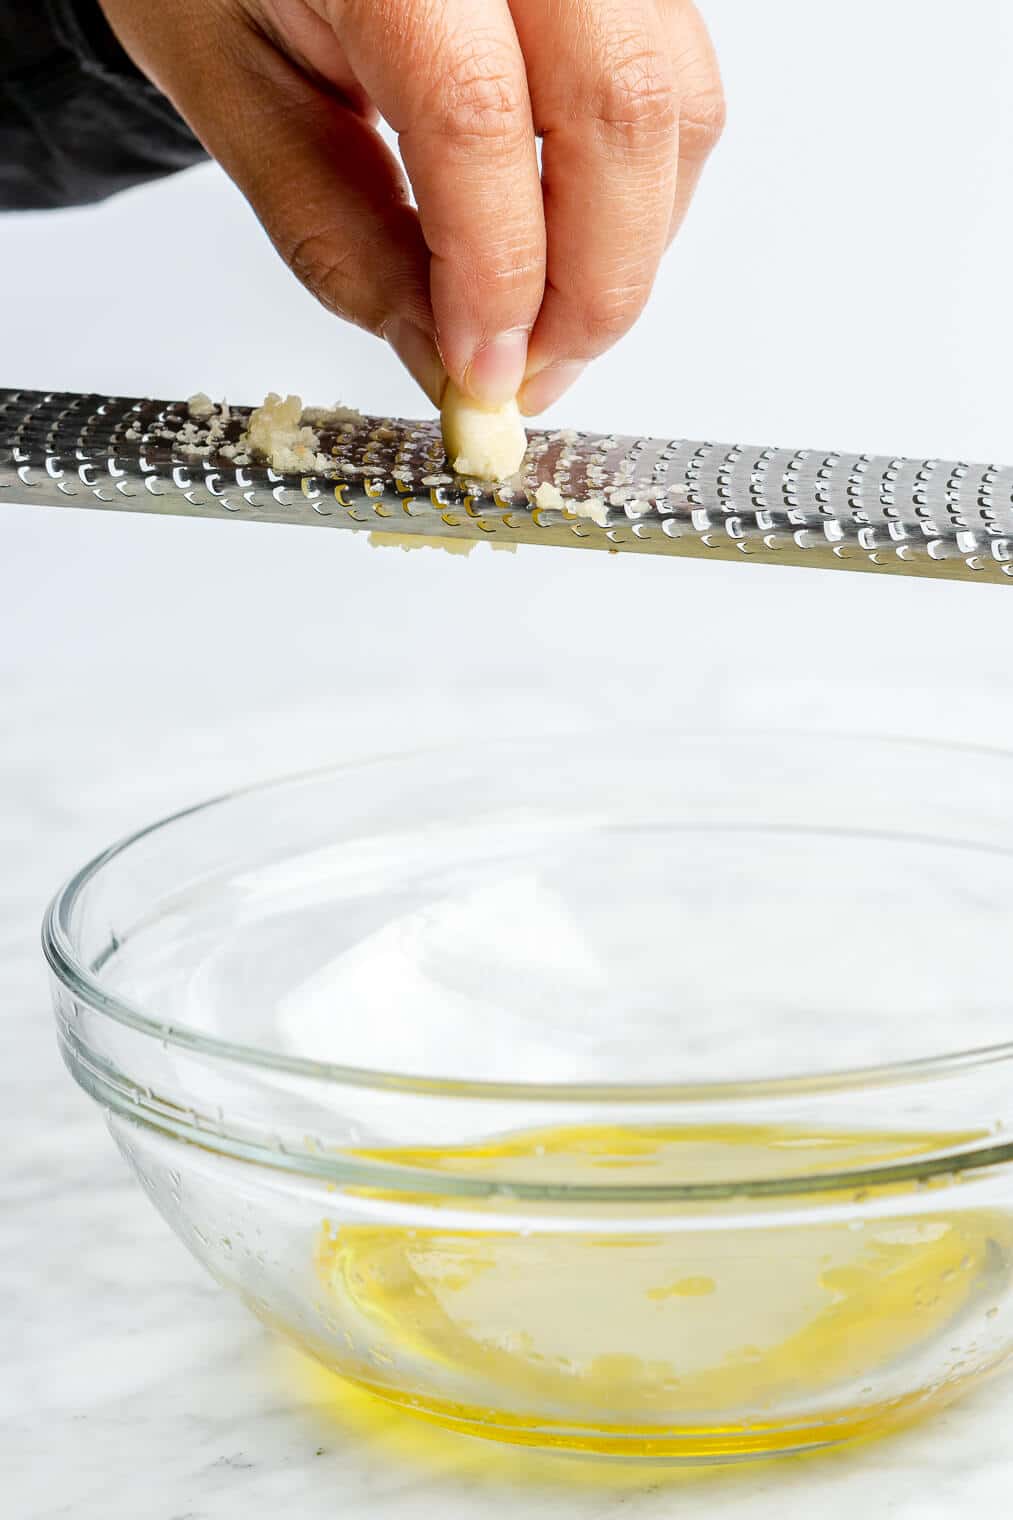 Hand grating a clove of garlic on a microplane into a glass bowl with lemon juice and olive oil.